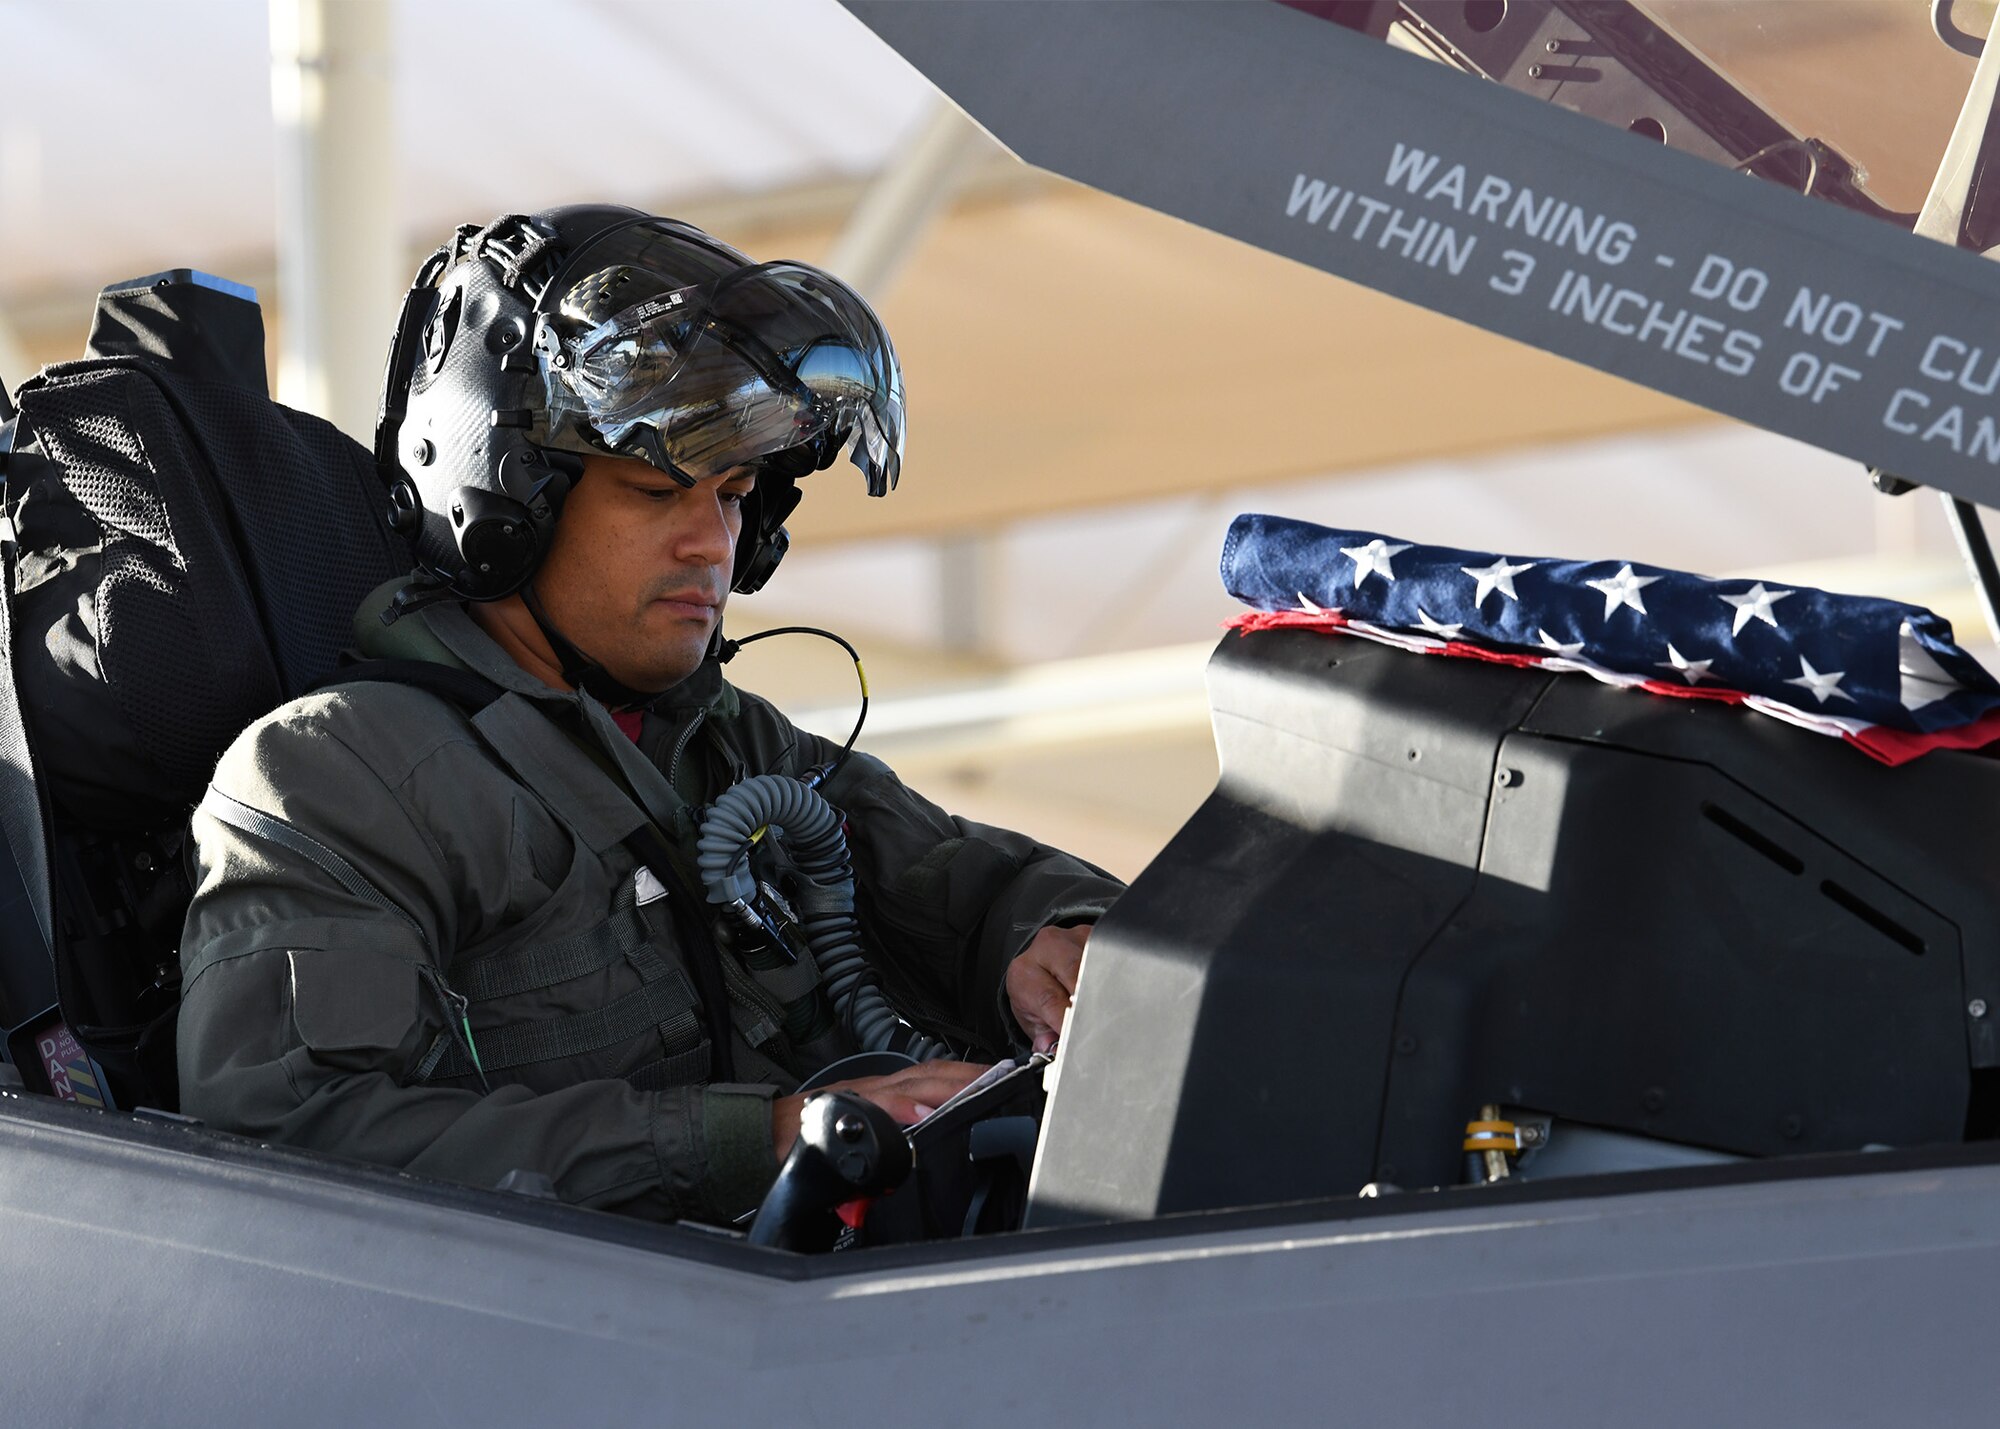 Reserve Citizen Airmen from the 944th Fighter Wing at Luke Air Force Base, Arizona, executed an F-35 Lightning II Missing Man formation flyover October 2, 2020. The mission over the Arizona State Capitol paid tribute to the late Maj. George Washington Biggs, U.S. Air Force (Ret.).